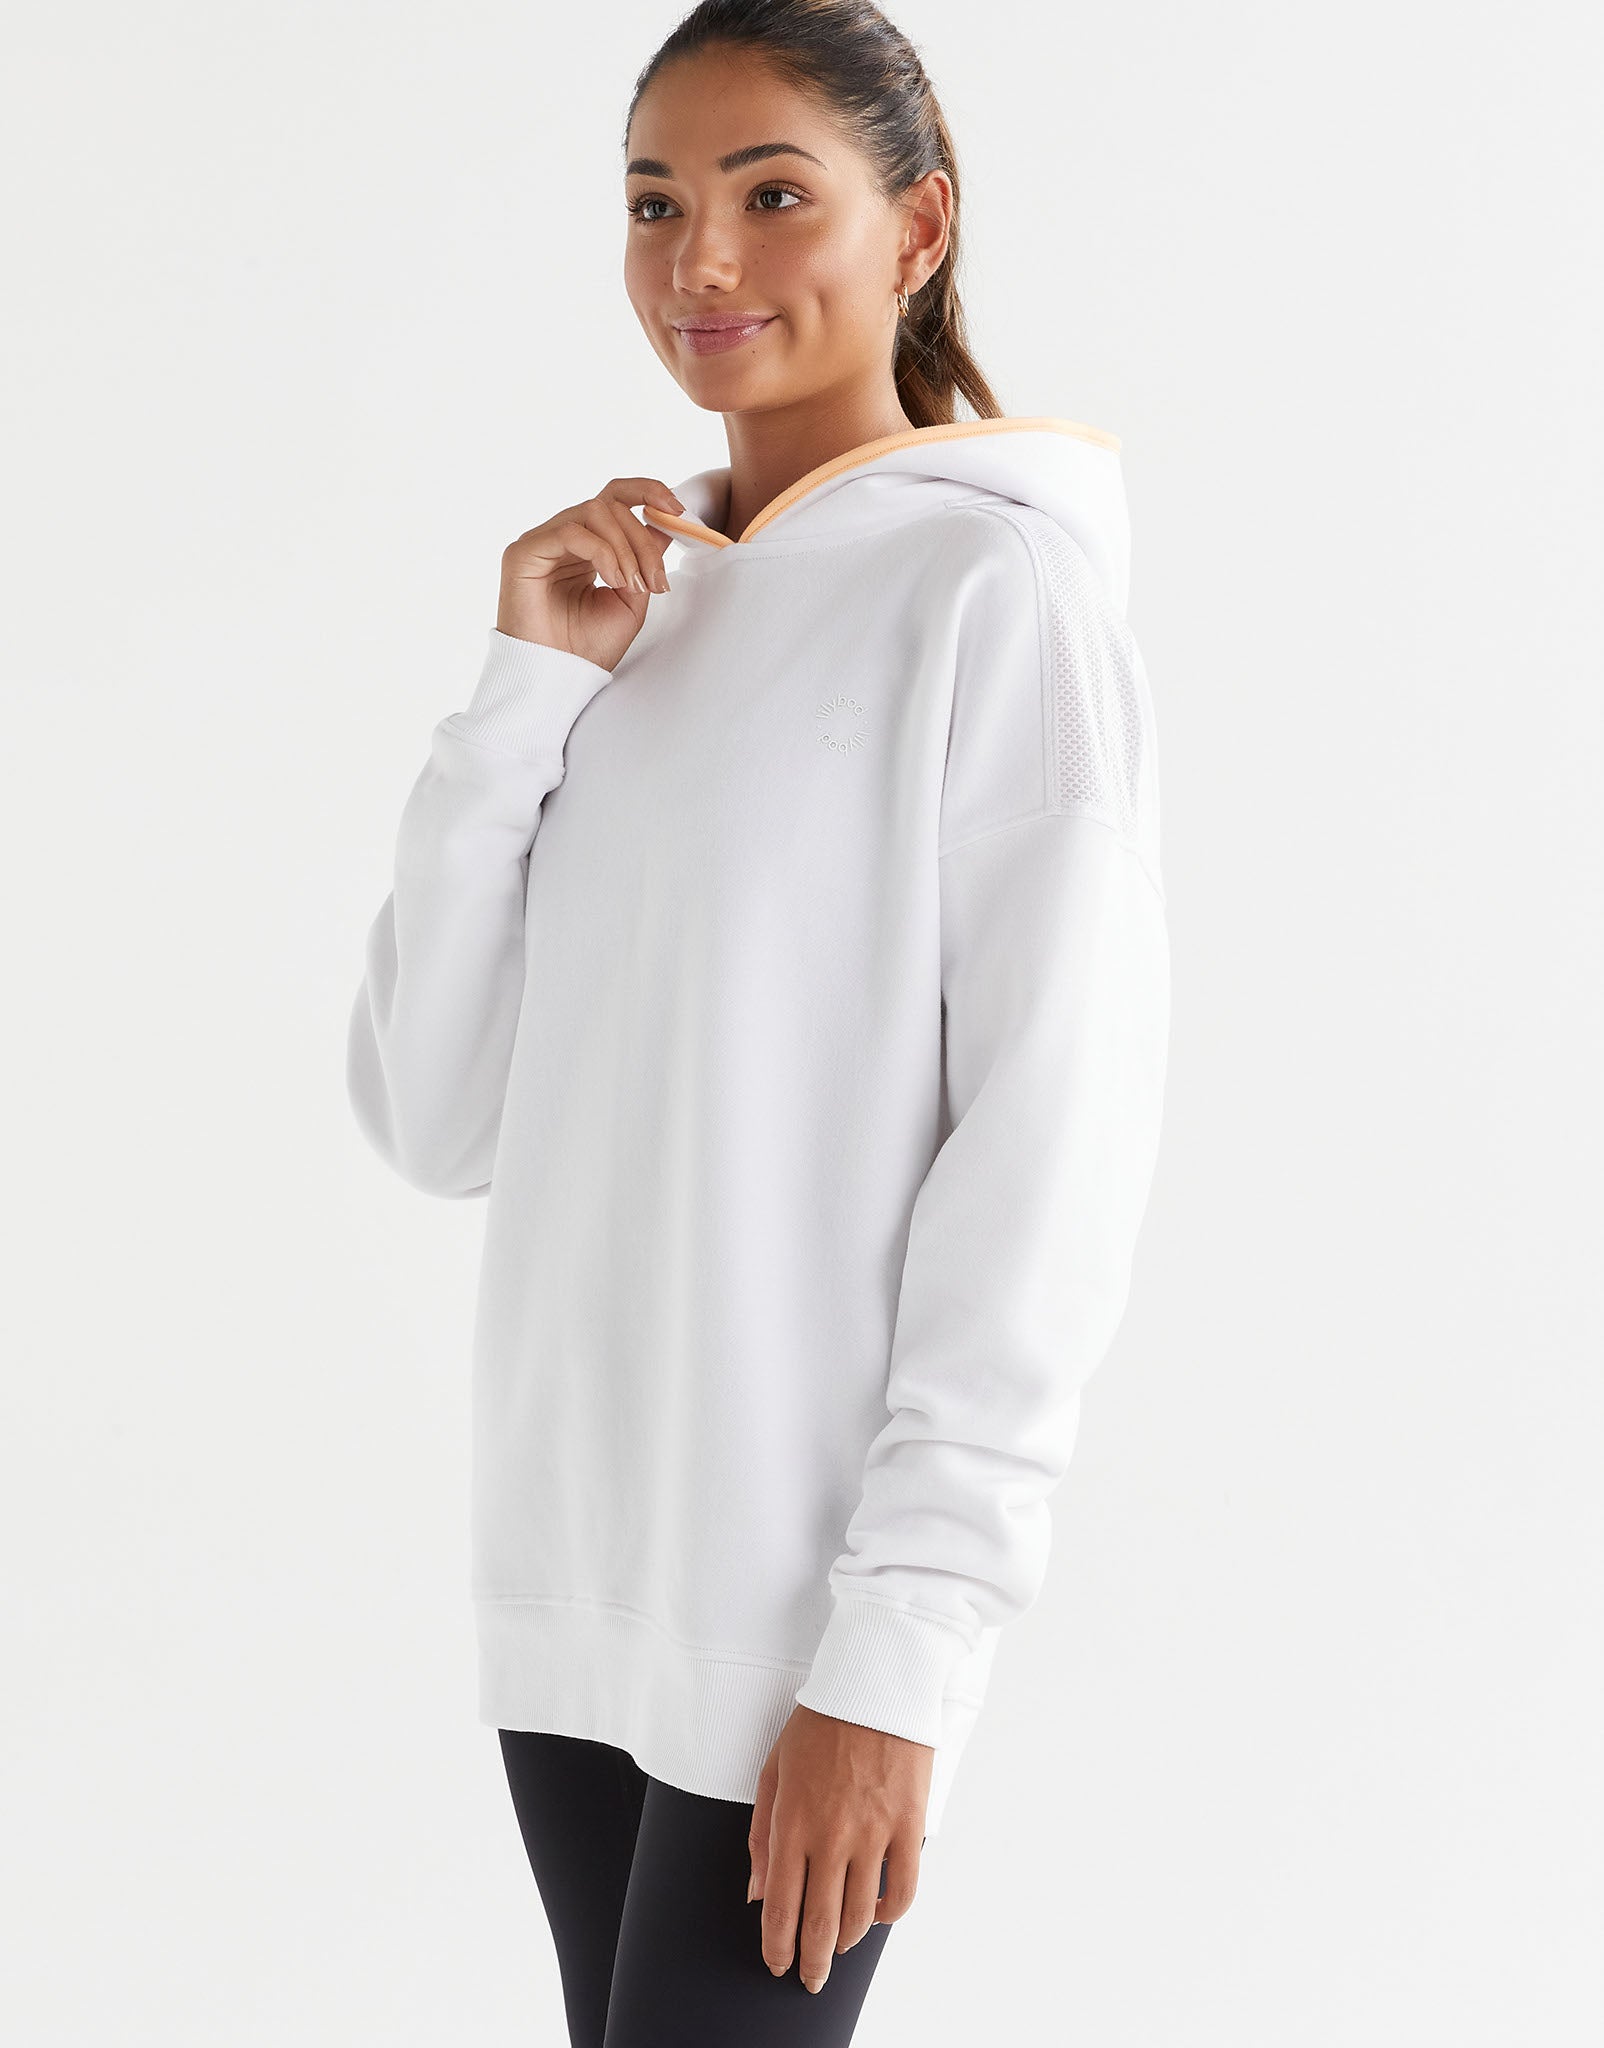 Lilybod-Lucy-Hooded-Sweat-White-LT68-C22-WT-2.jpeg